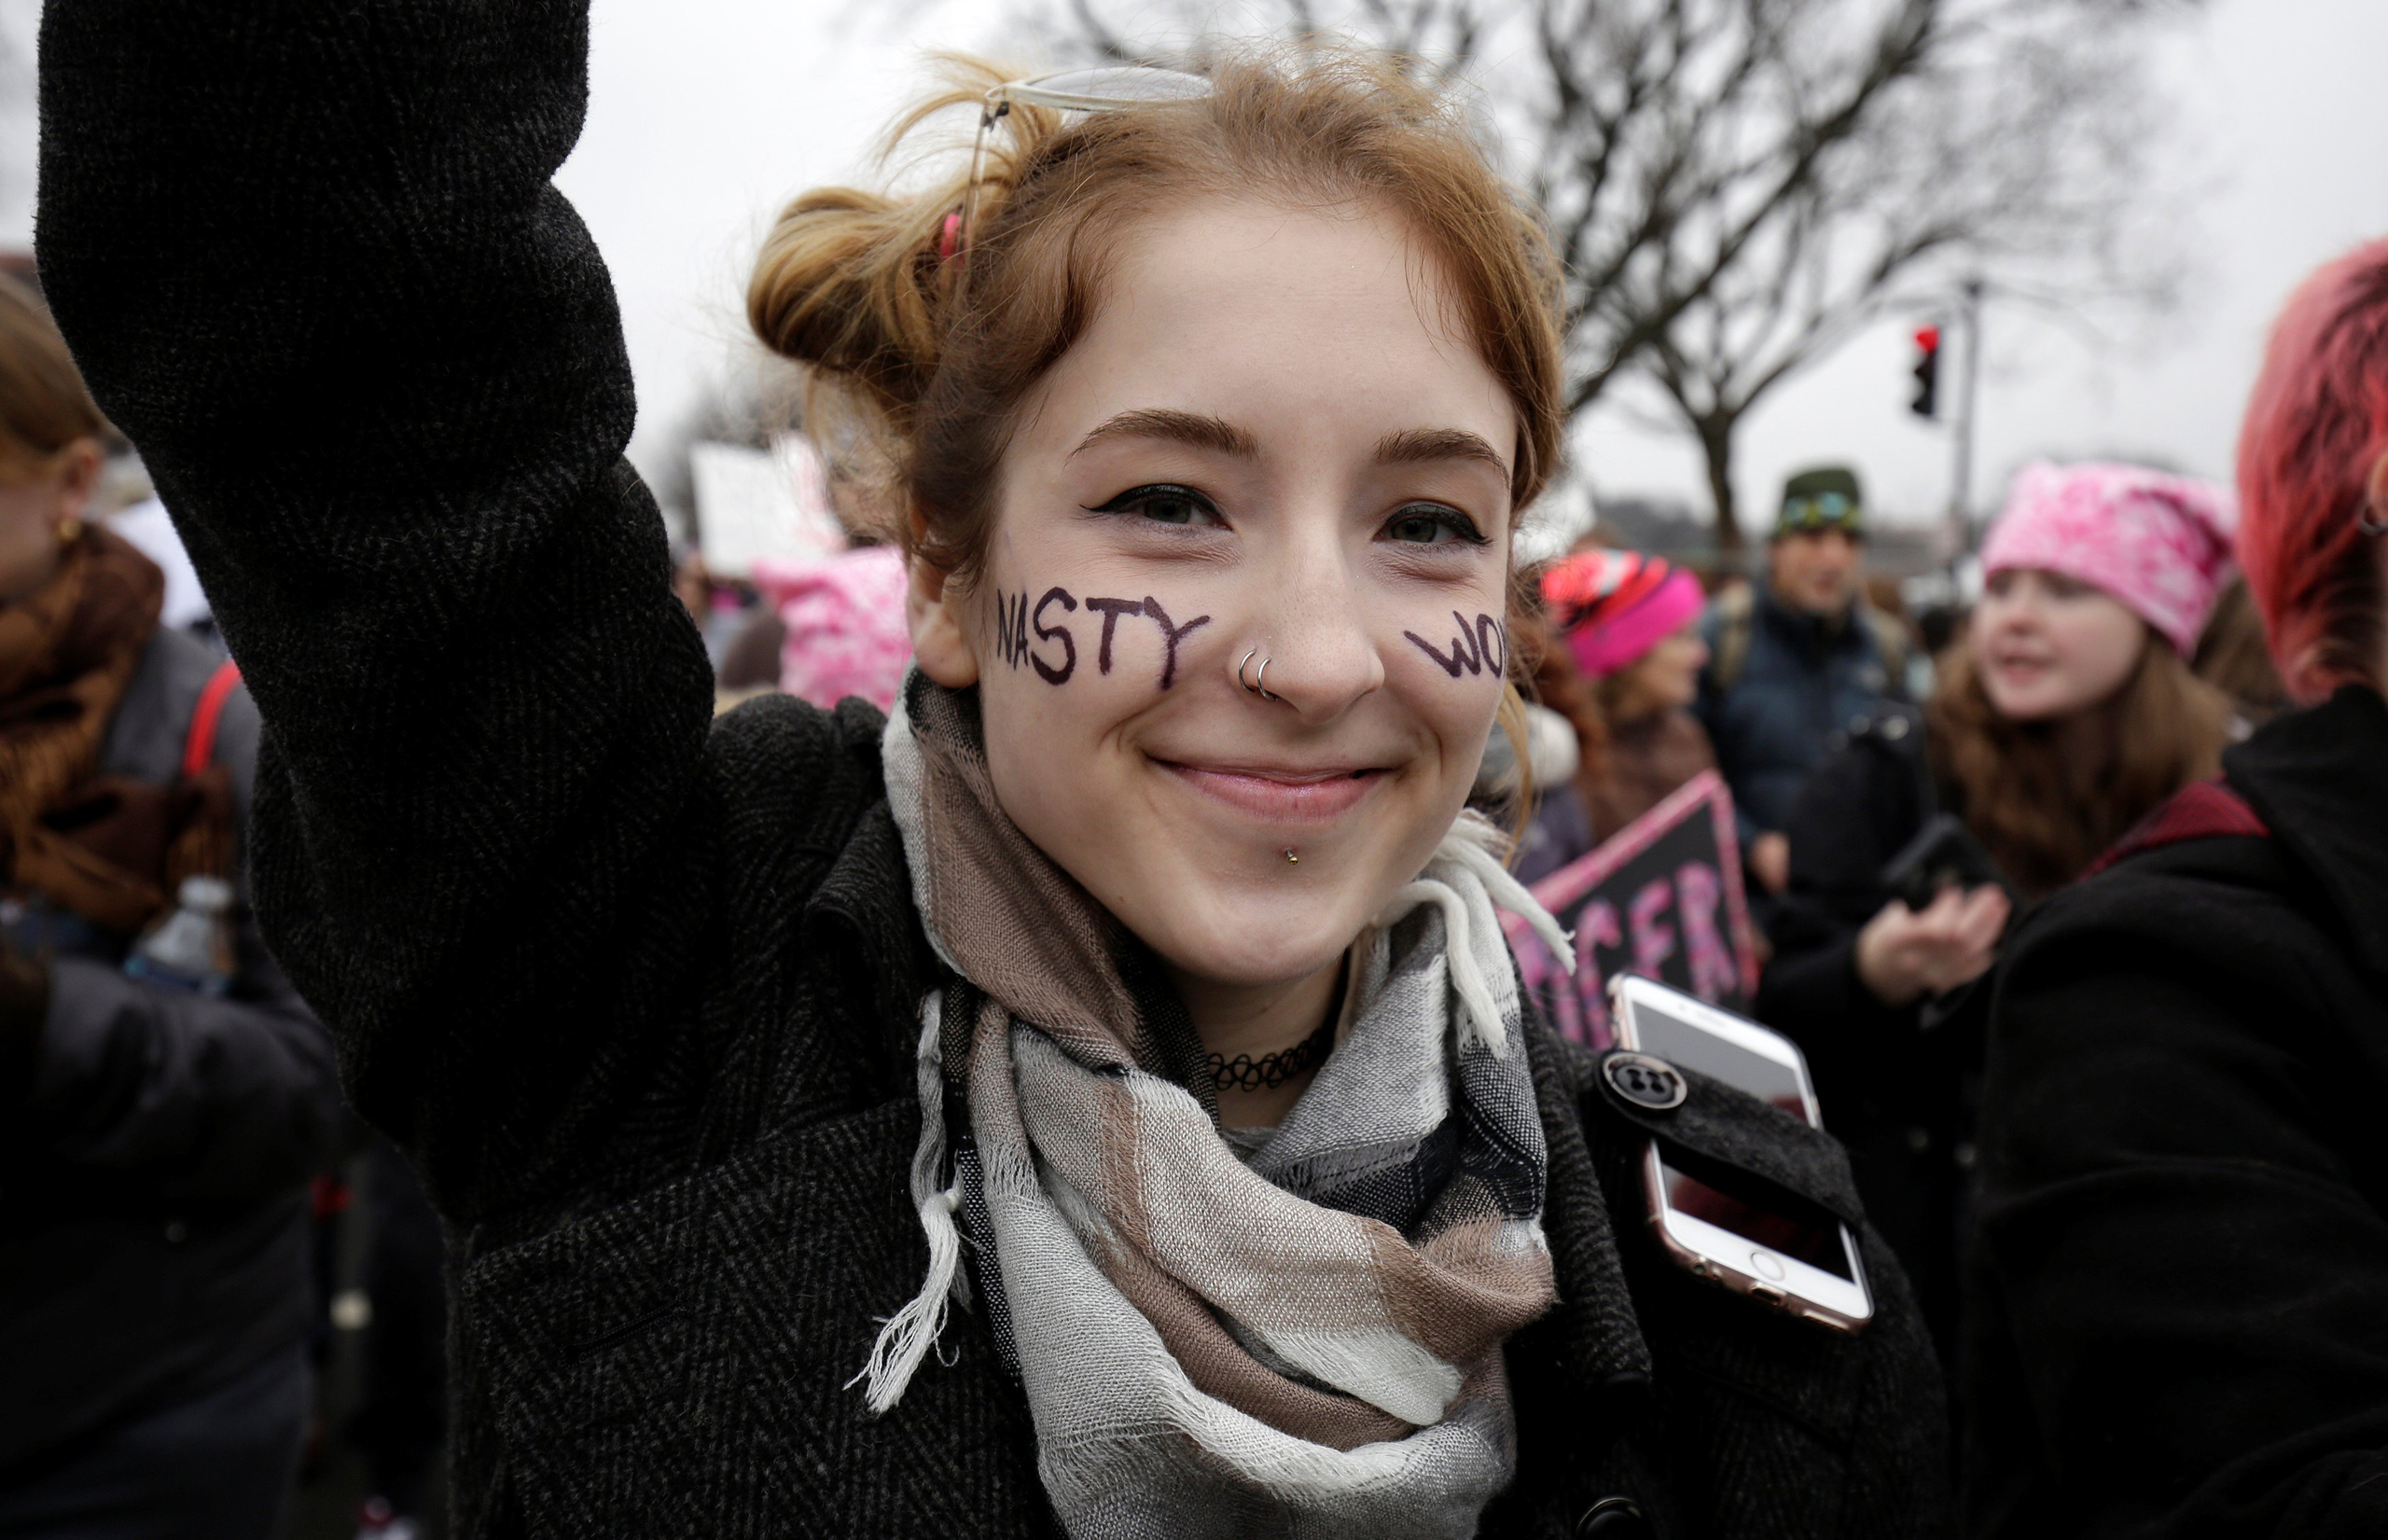 A protester wears  Nasty Woman  on her face during the Women‚Äôs March on Washington in reaction to U.S. President Donald Trump's inauguration in Washington.